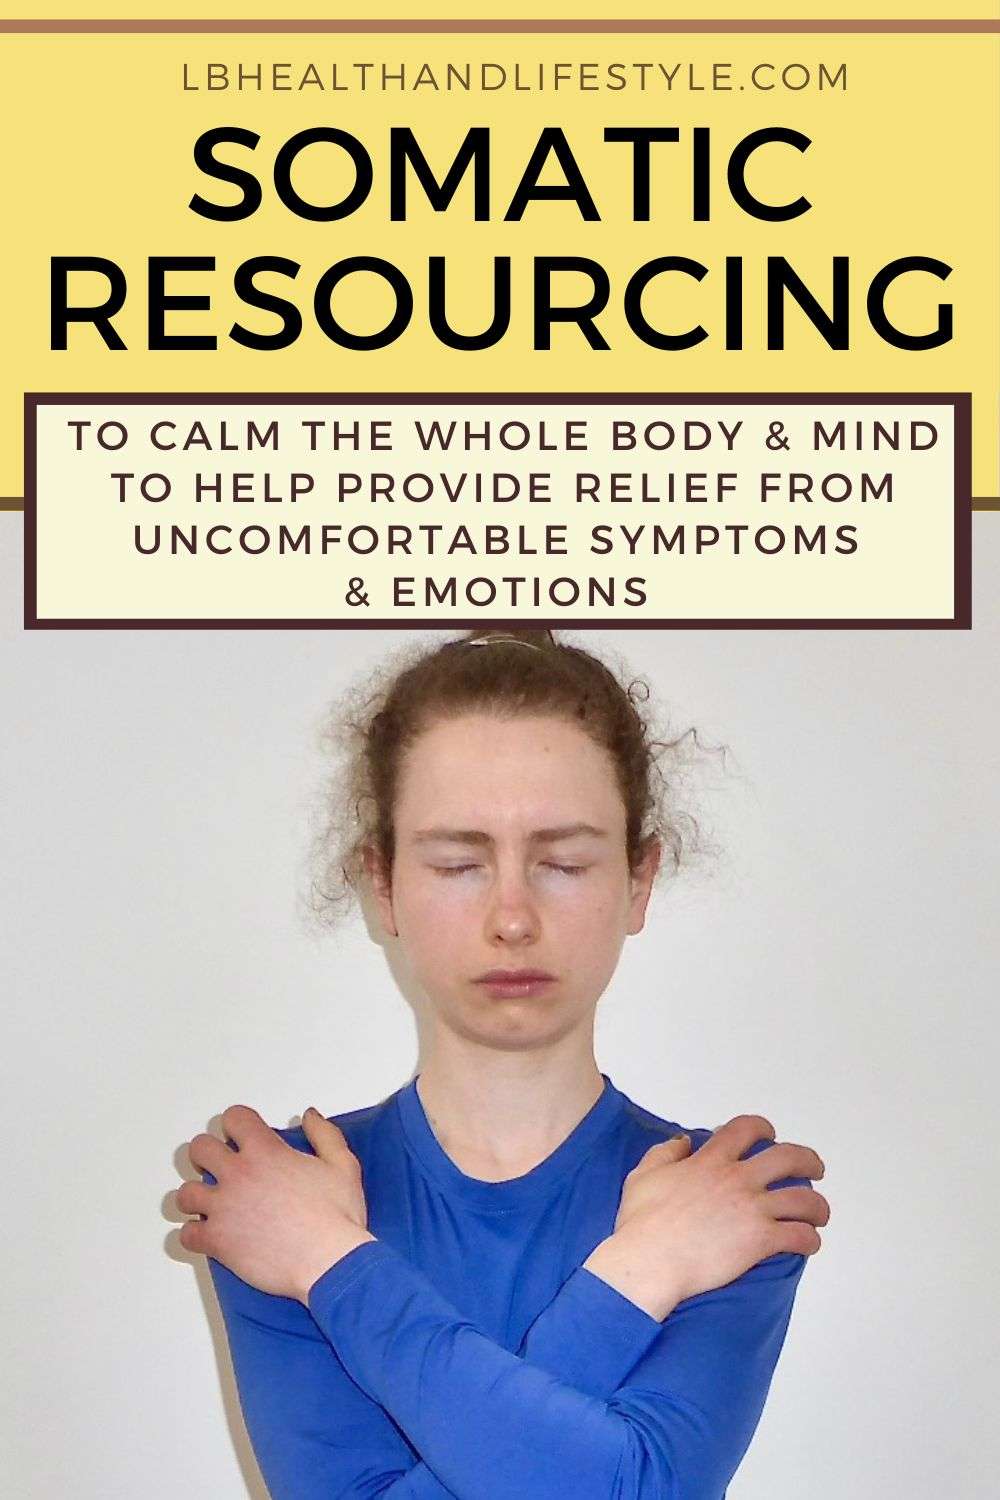 somatic resourcing to calm the whole body and mind to help provide relief from uncomfortable symptoms and emotions